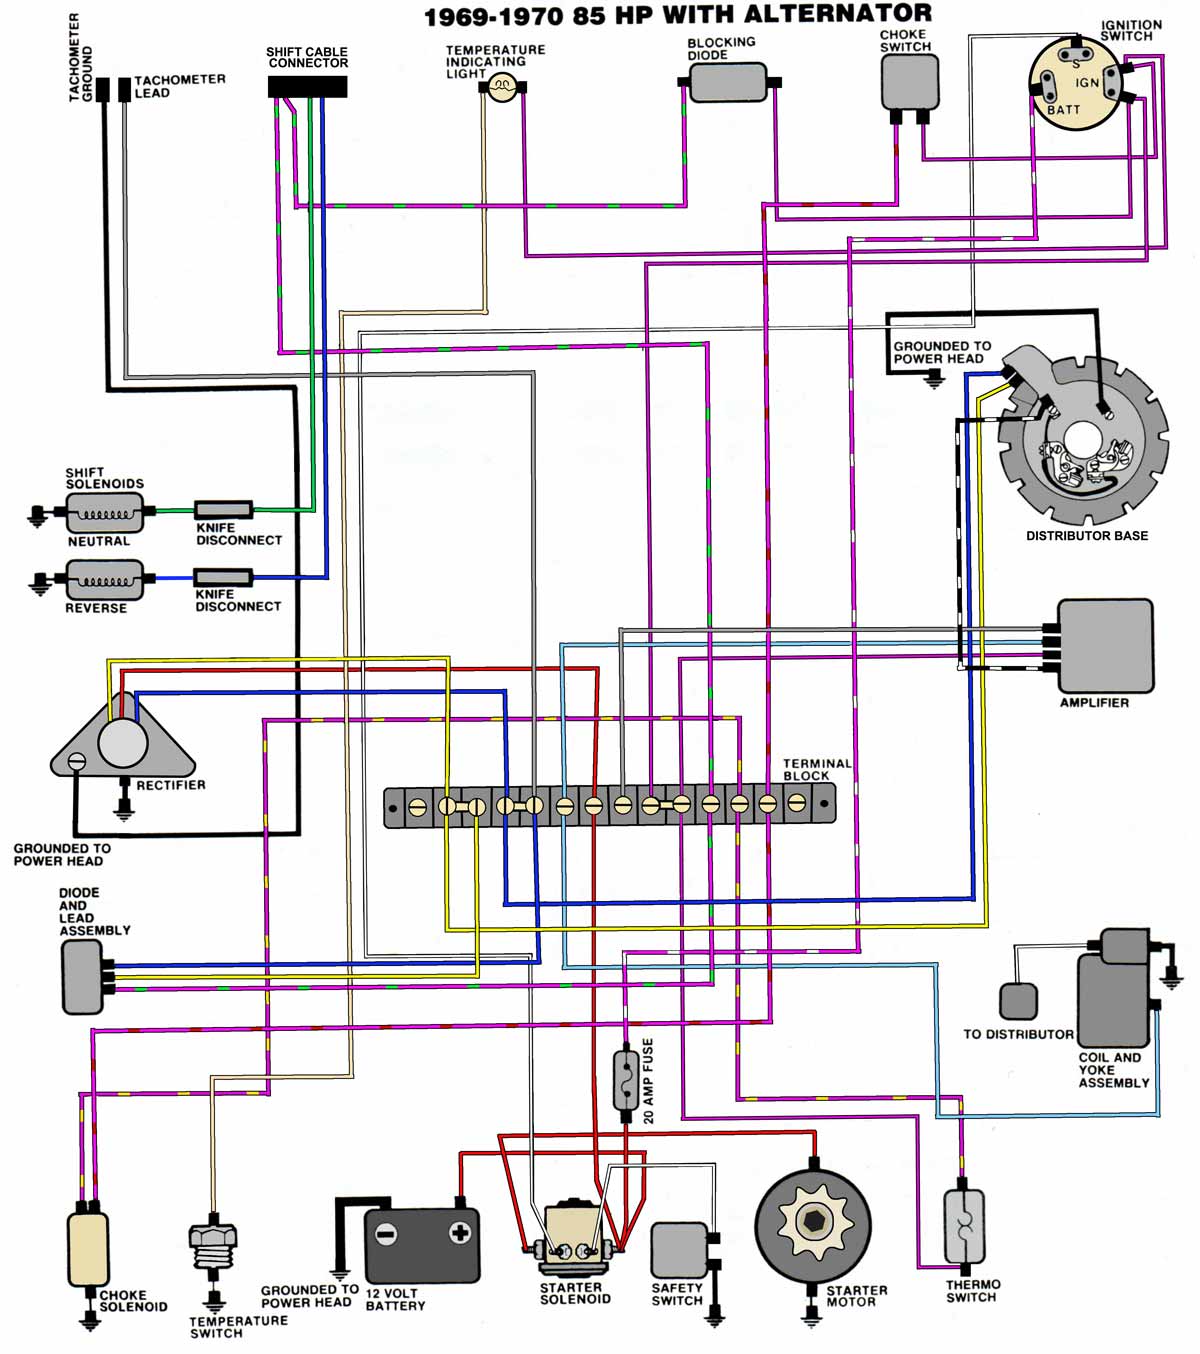 Schematic Boat Wiring Diagram from www.maxrules.com